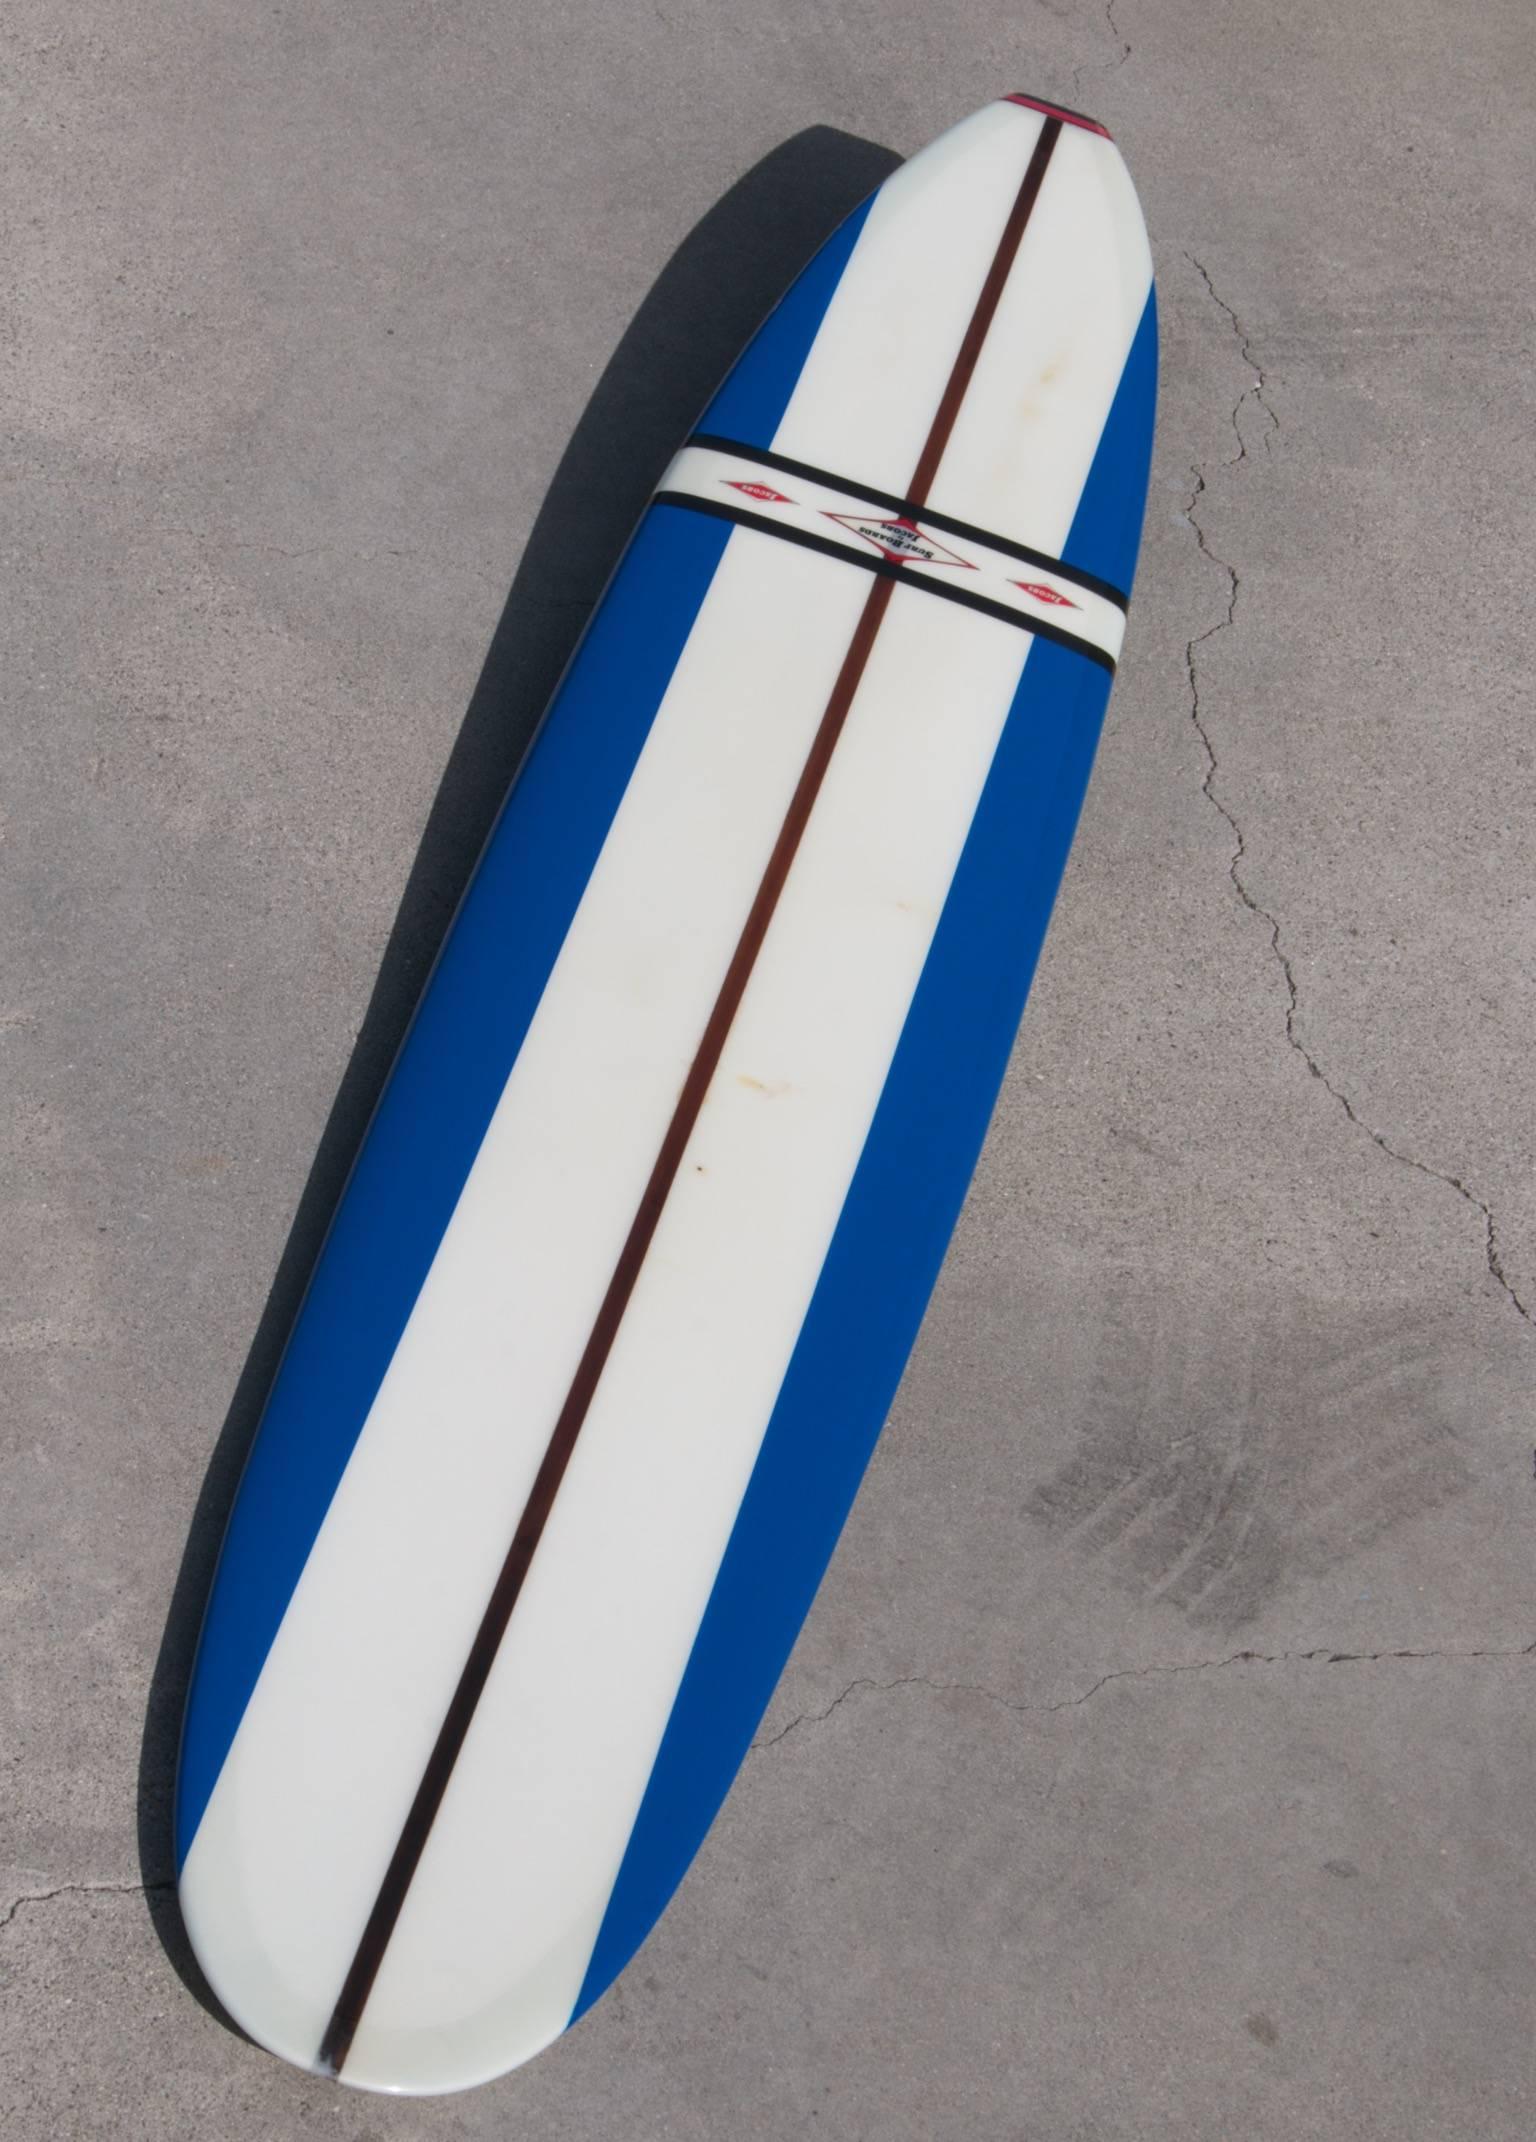 Jacobs surfboard fully restored, blue, white and red, early 1960s.

This majestic early 1960s surfboard has been fully restored, is a real eye-catcher and a board that any collector would be proud to display. The three logos, black competition